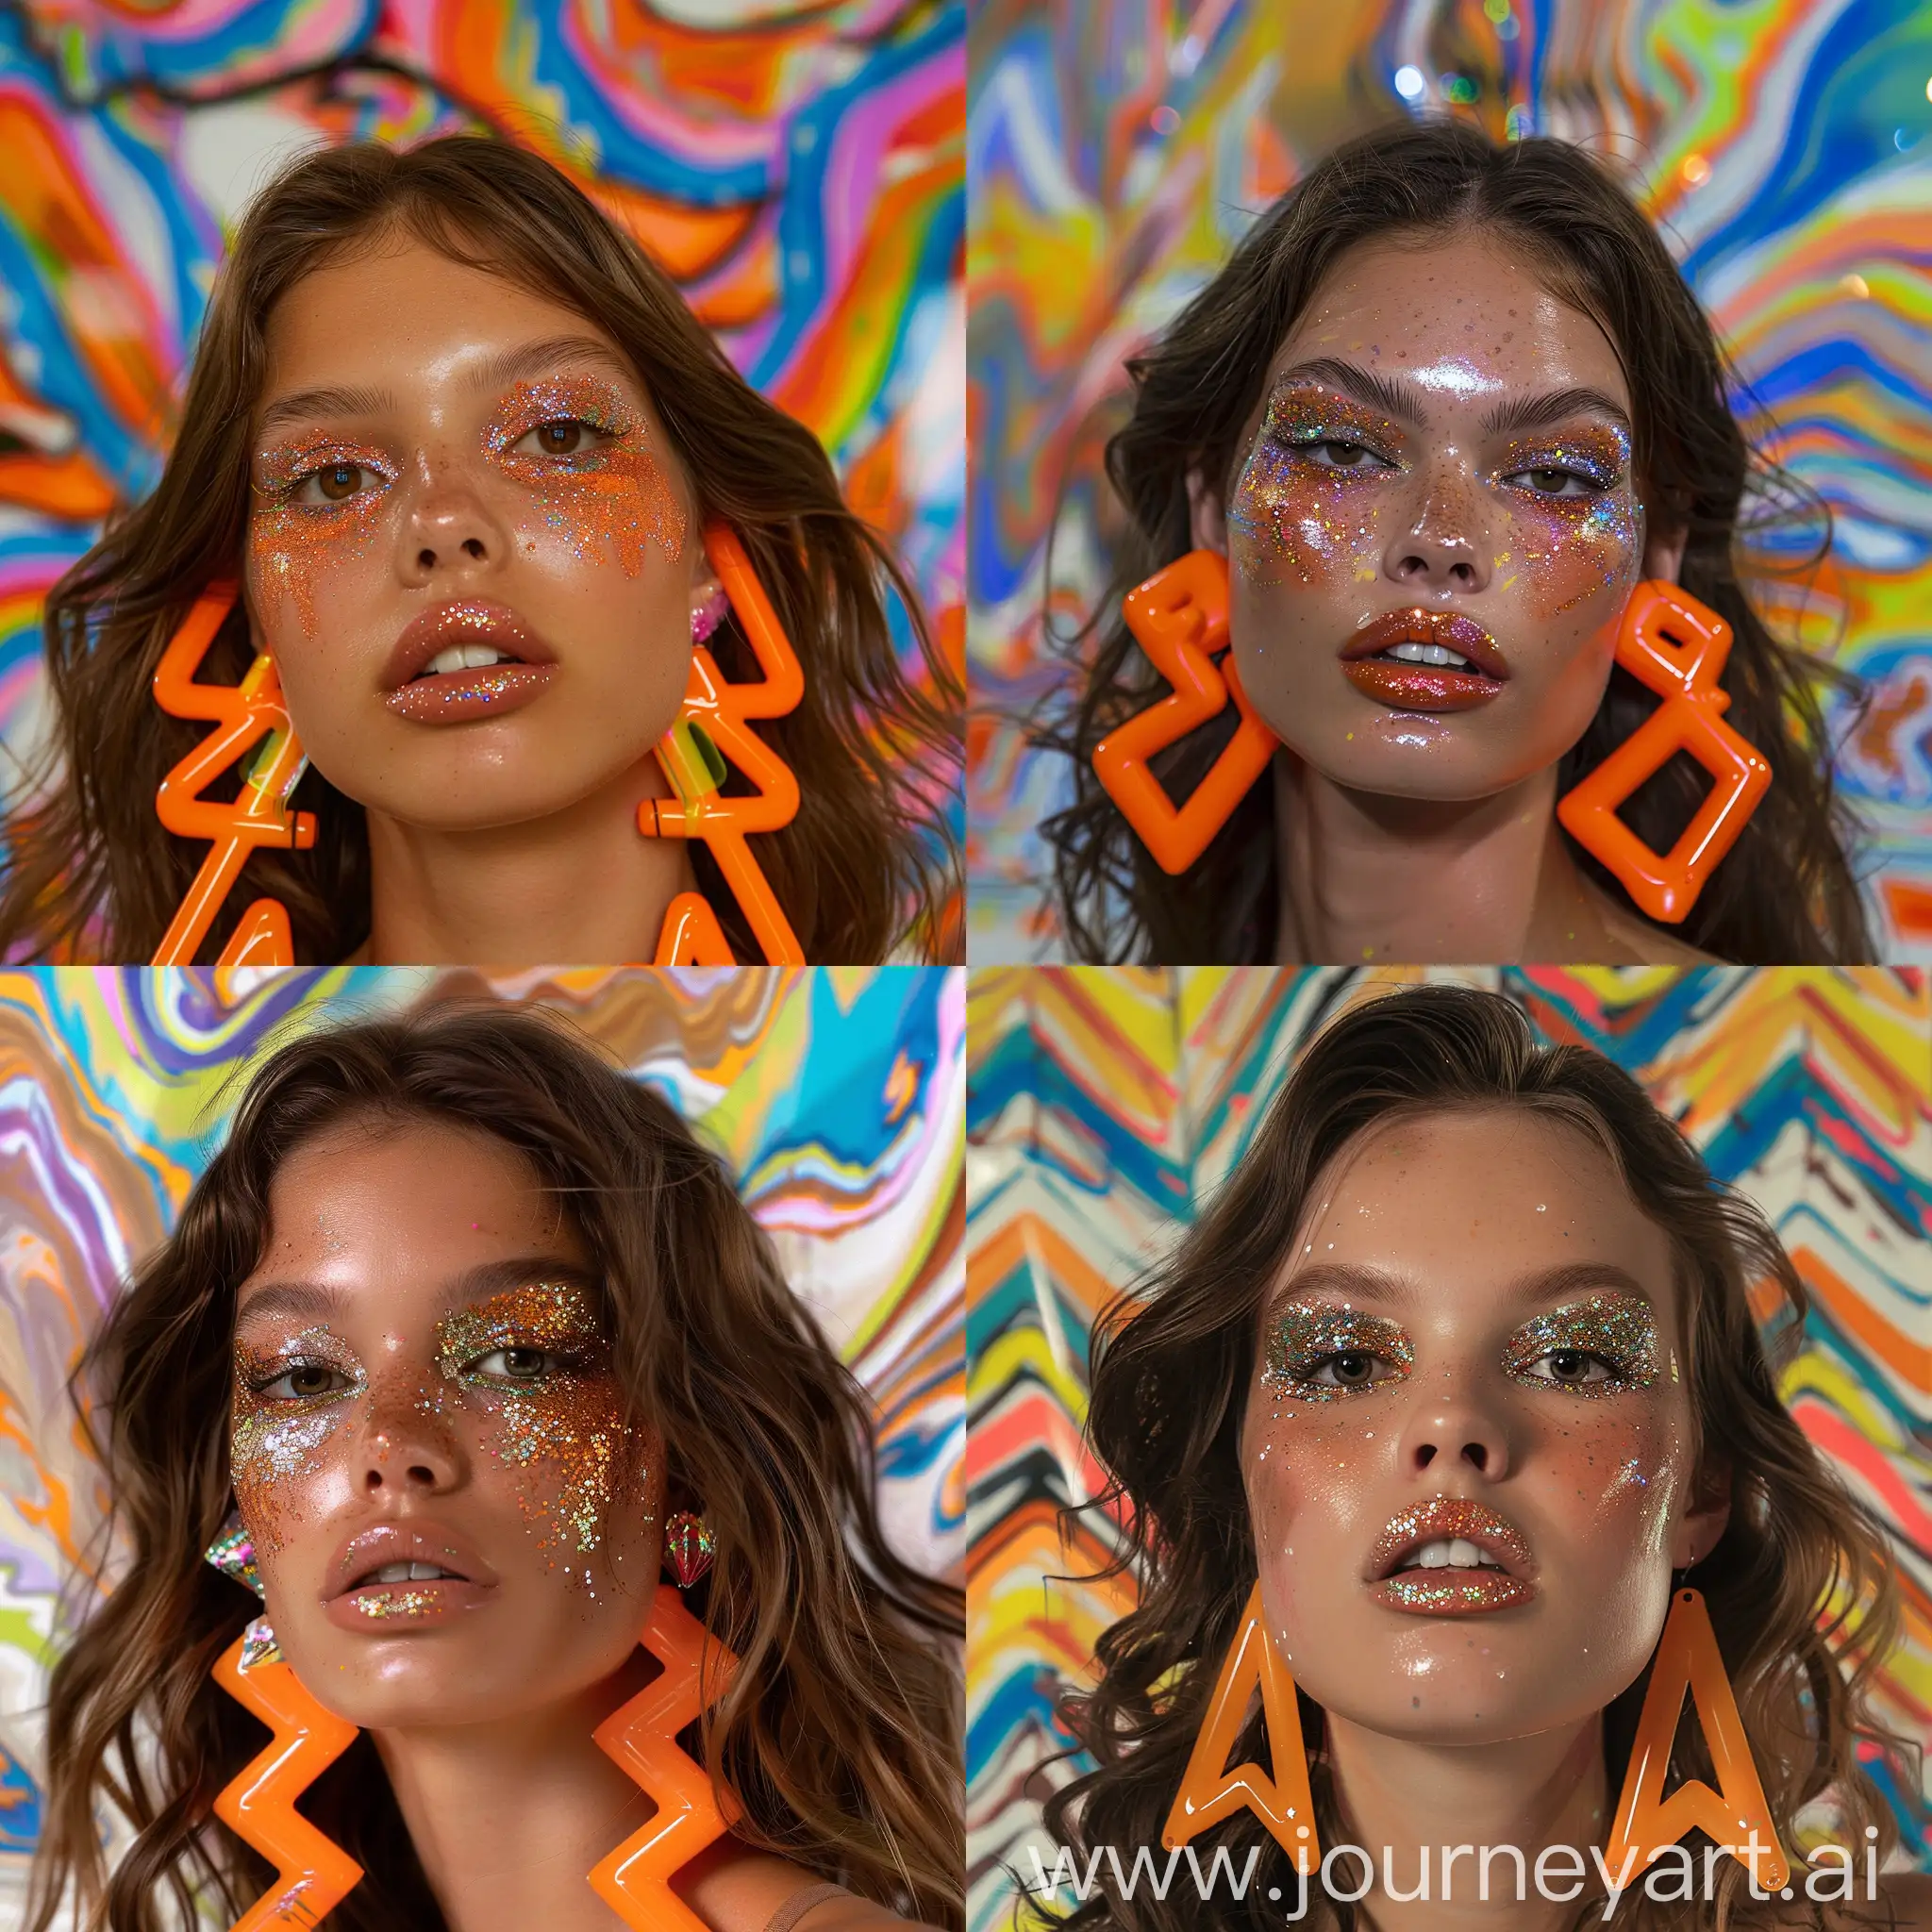 Closeup-Portrait-of-BrownHaired-Model-with-Glitter-Eyeshadow-and-ZigZag-Earrings-Against-Abstract-Canvas